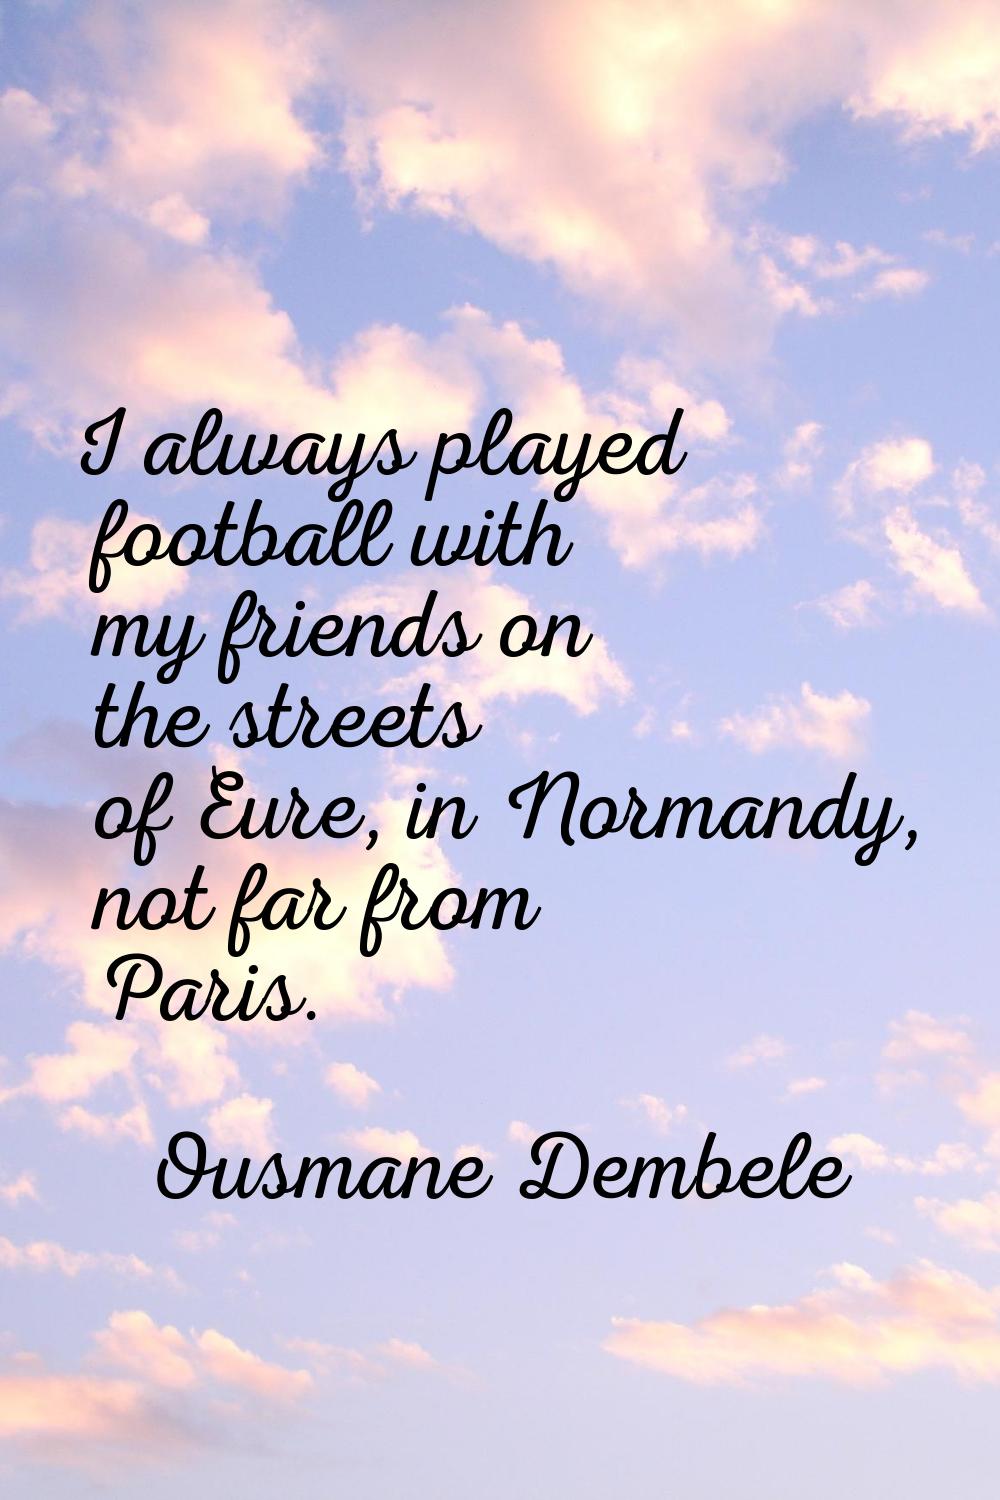 I always played football with my friends on the streets of Eure, in Normandy, not far from Paris.